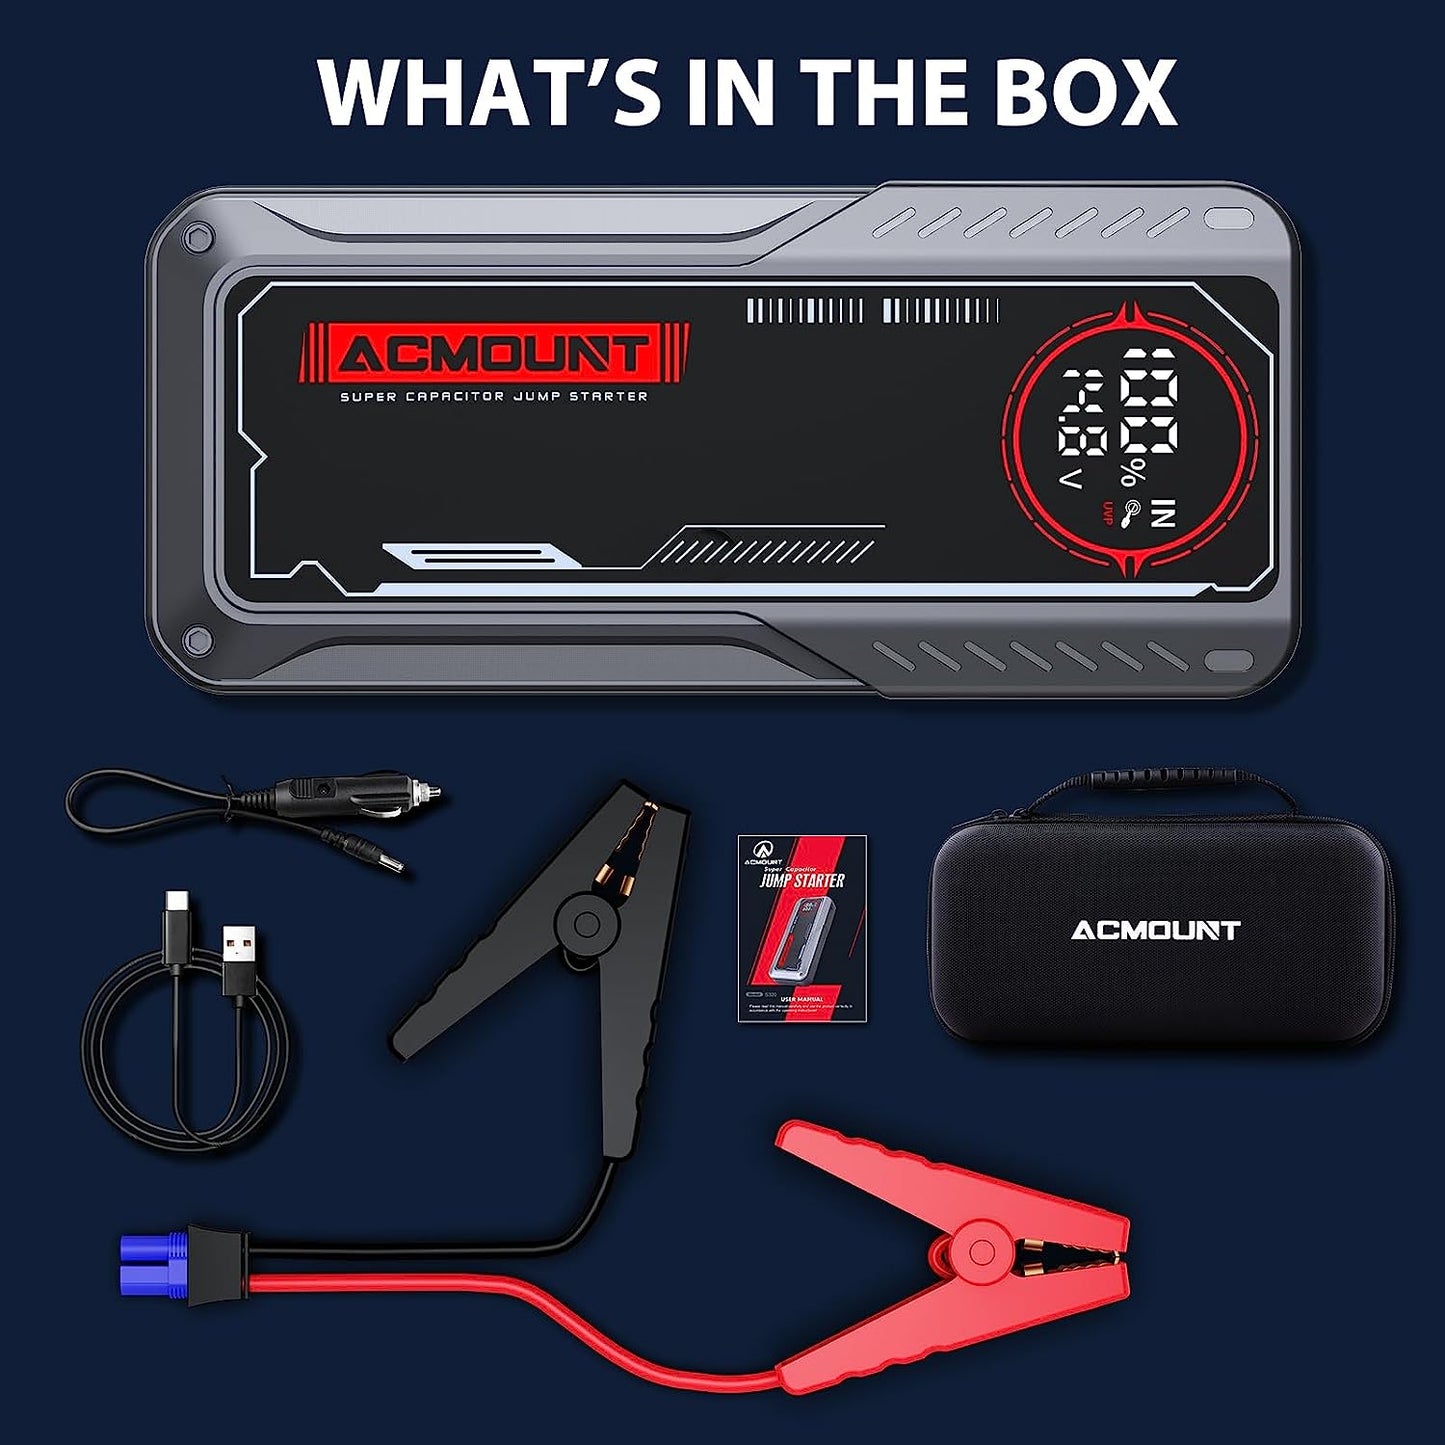 ACMOUNT 3000A Super Capacitor Jump Starter, 500F Battery-Free Car Jump Box(Up to 10.0L Gas, 8L Diesel), Built-in Supercapacitor with Large LCD Display, No Pre-Charging Starter